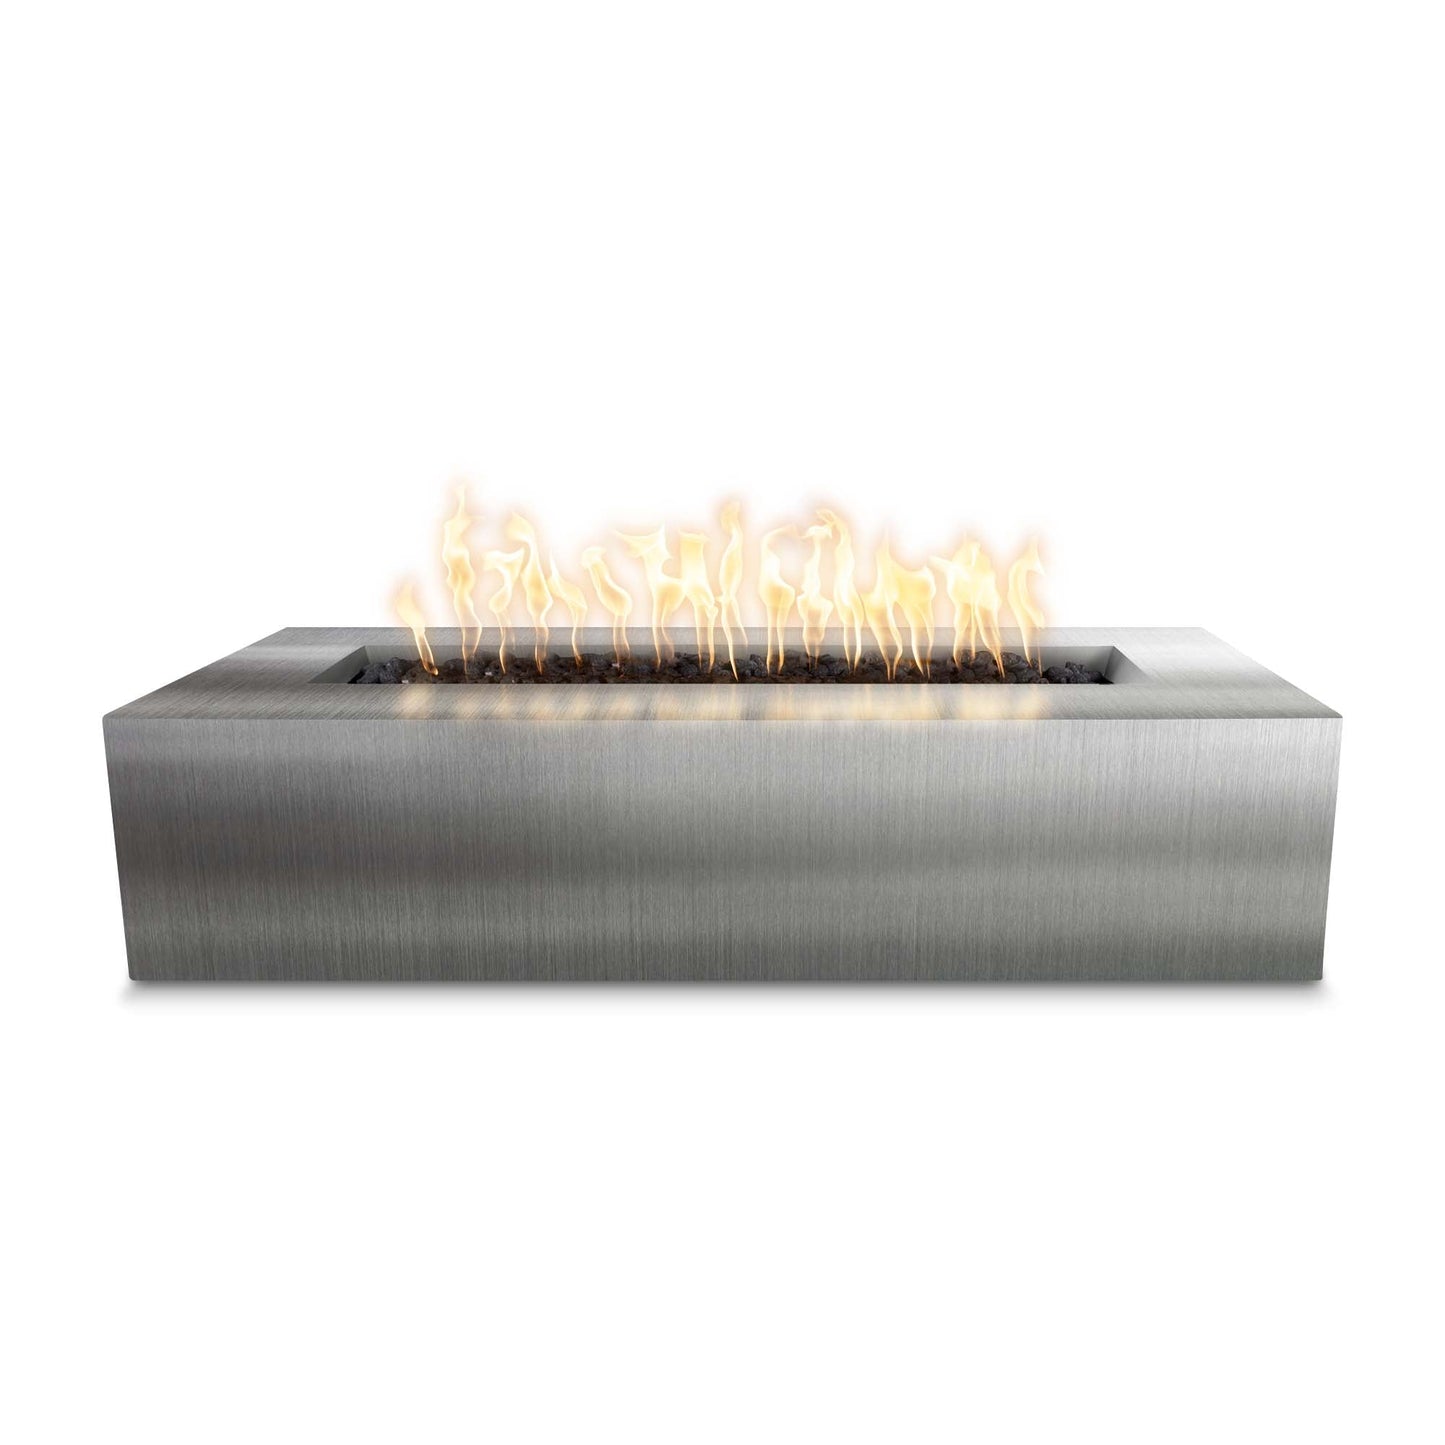 The Outdoor Plus Rectangular Regal 54" Stainless Steel Liquid Propane Fire Pit with 12V Electronic Ignition